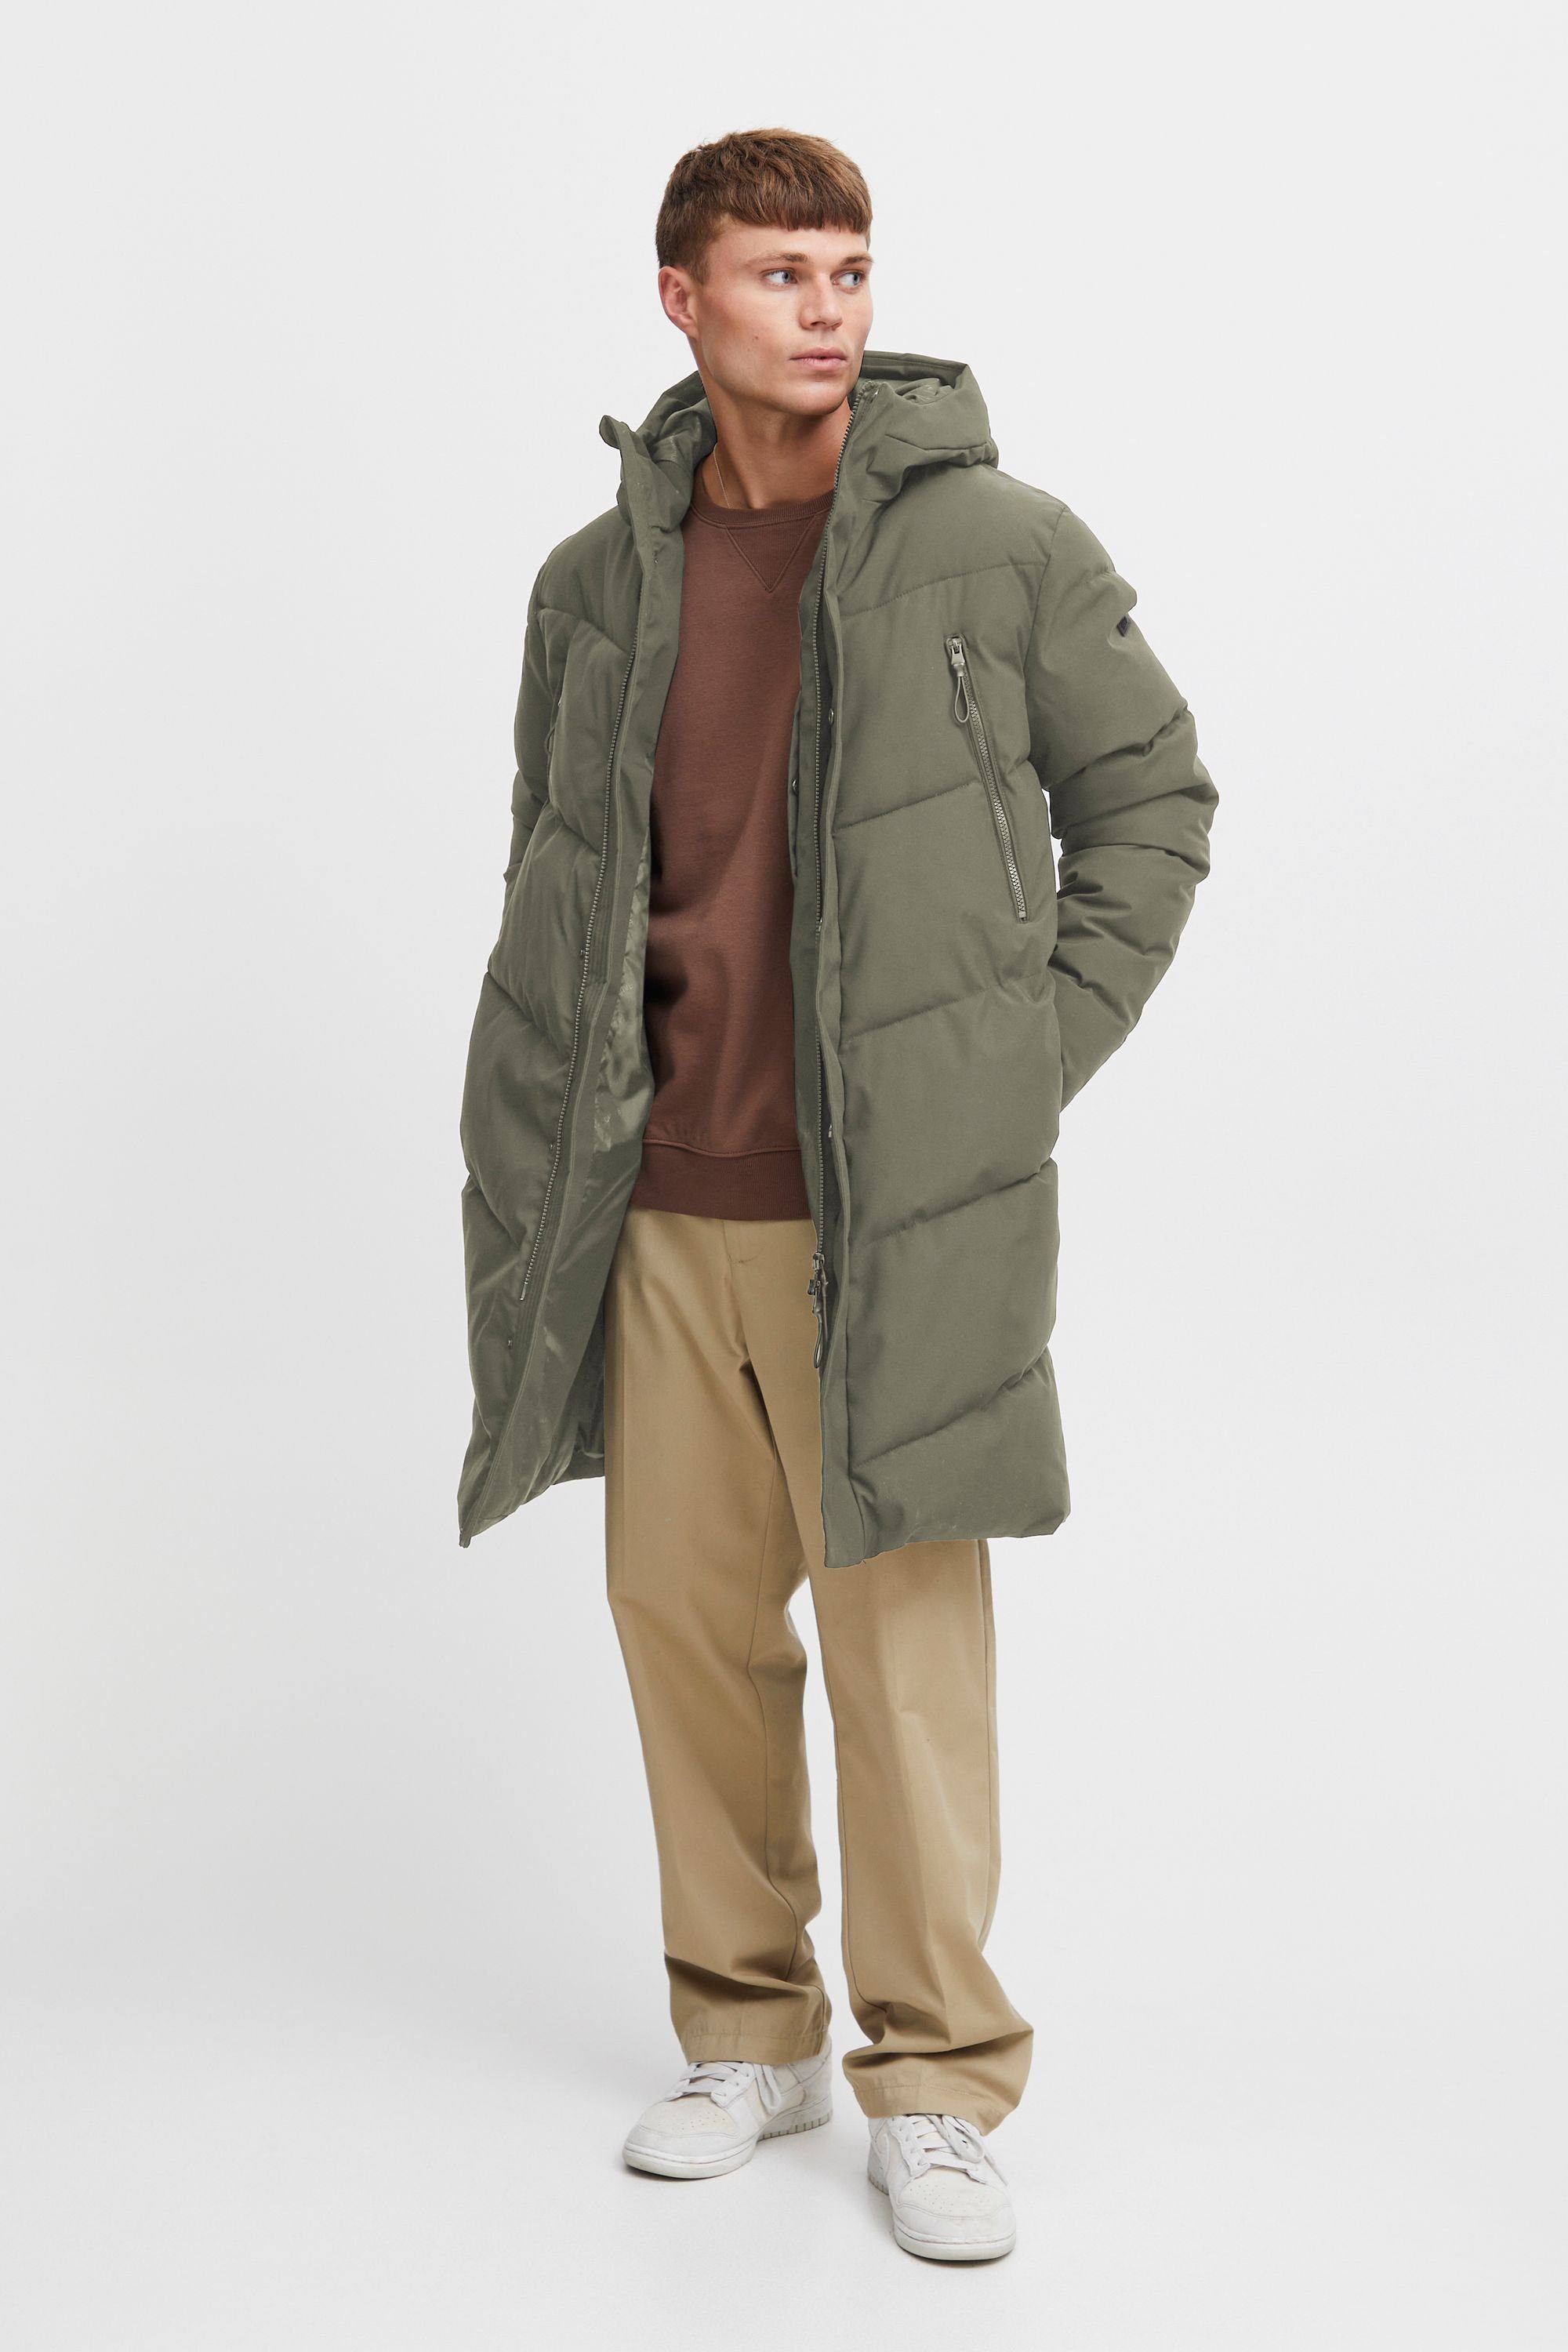 Solid Steppjacke SDGabe Long Dusty Olive (180515)